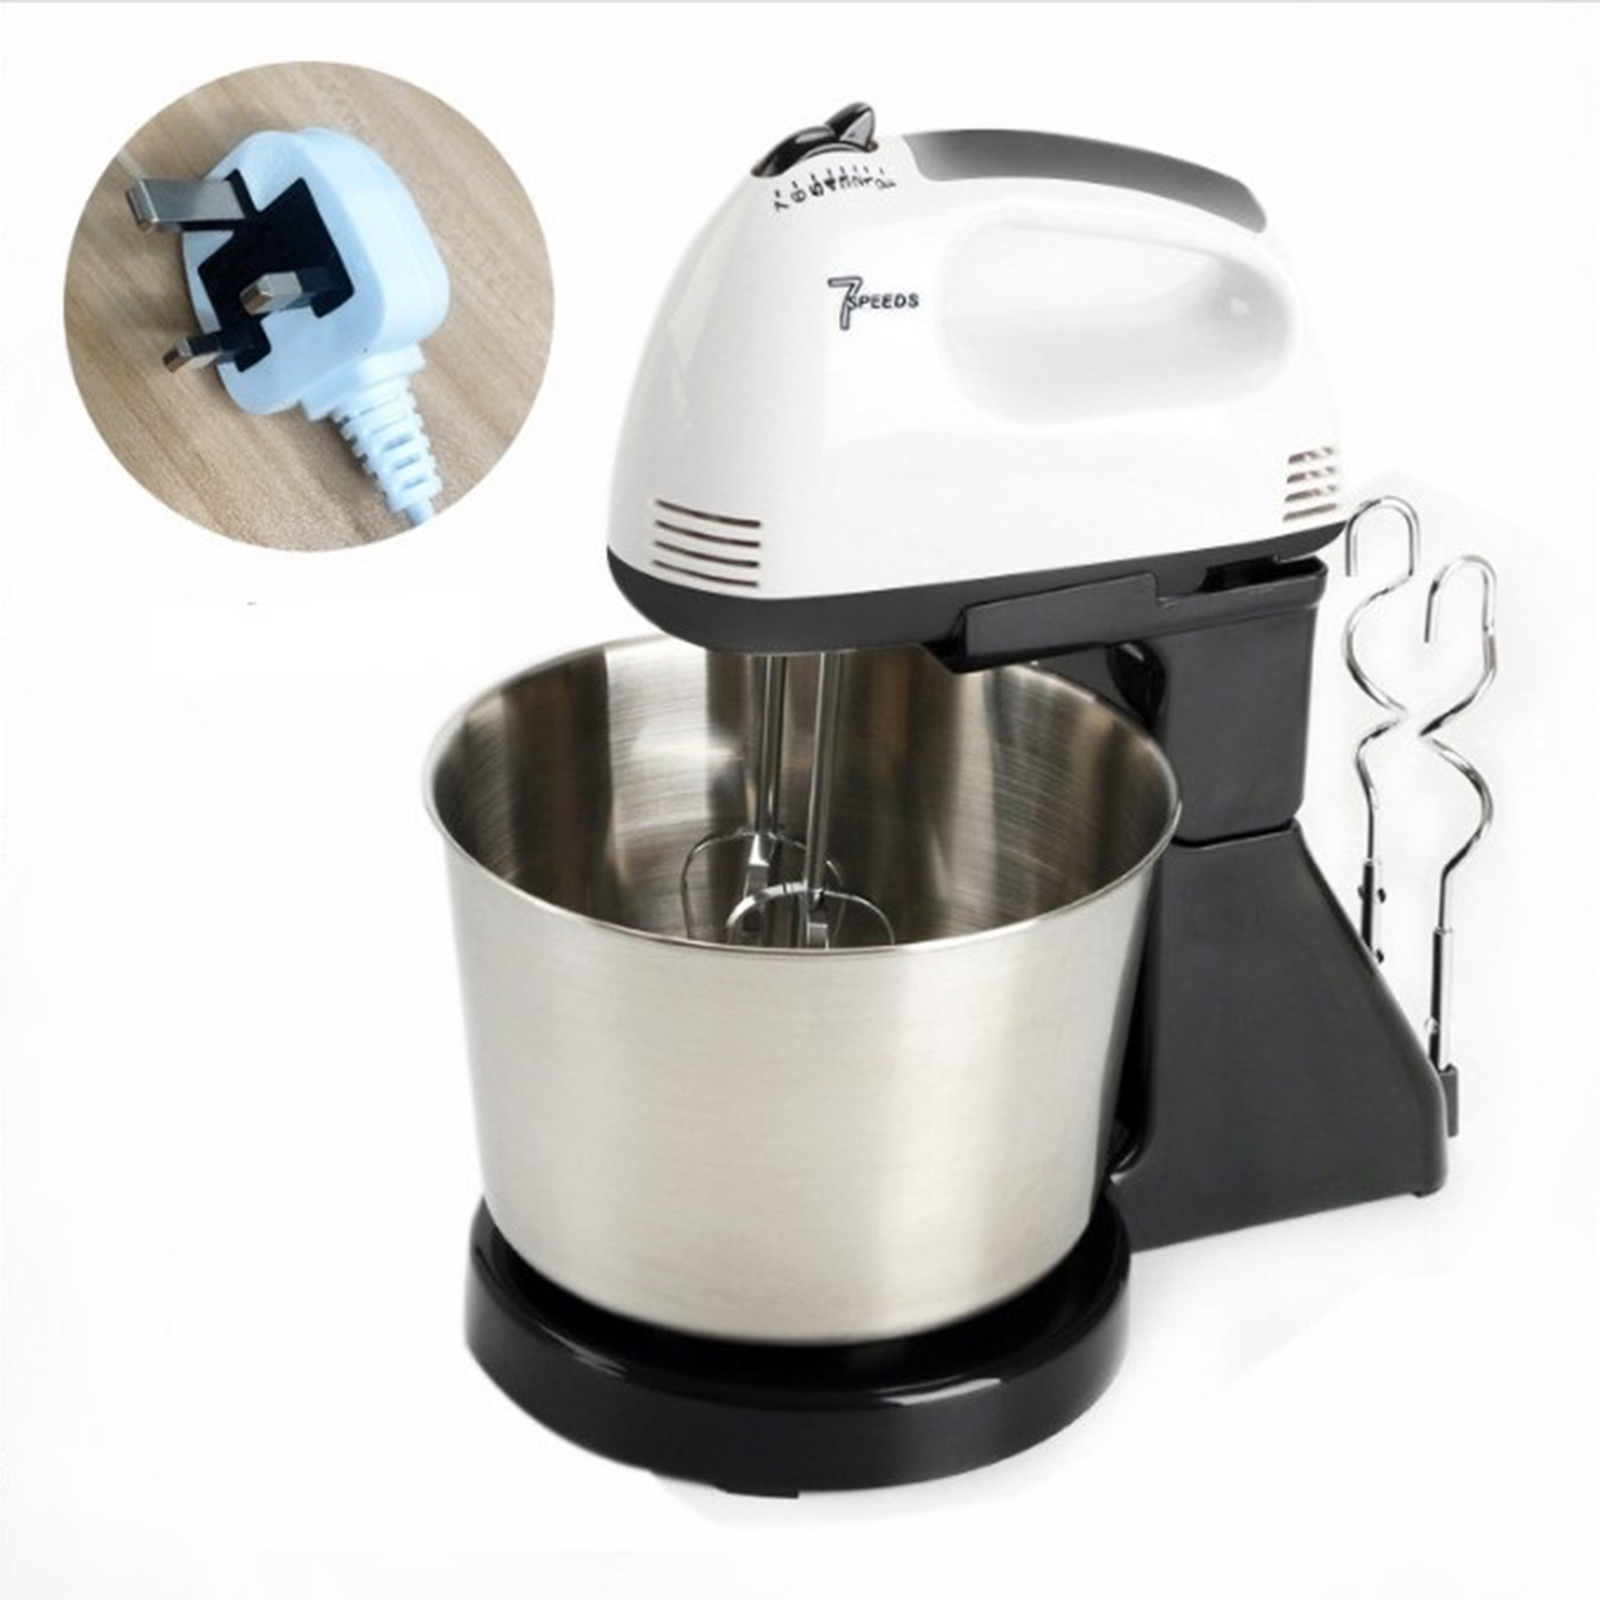 7-speed Automatic Mixer Hand-held Electric Food Mixers Egg Beater UK Plug Black